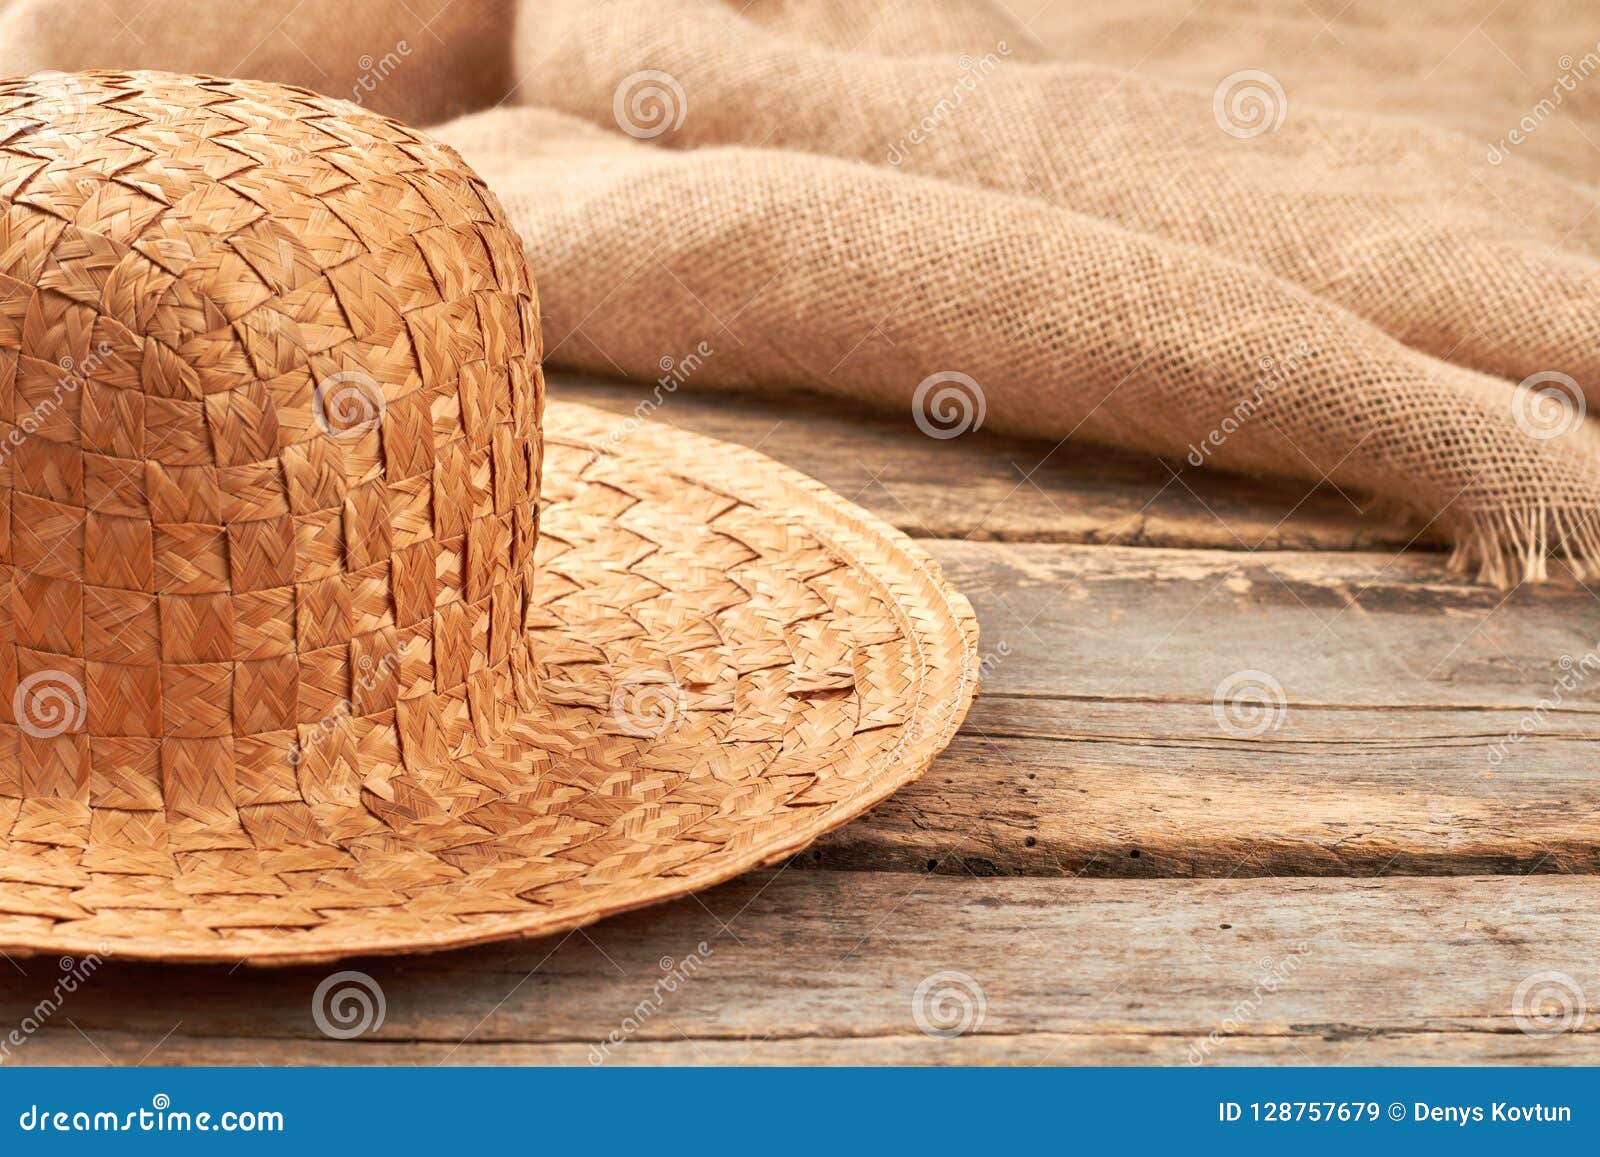 Straw Hat on Rustic Wooden Background. Stock Image - Image of napkin ...